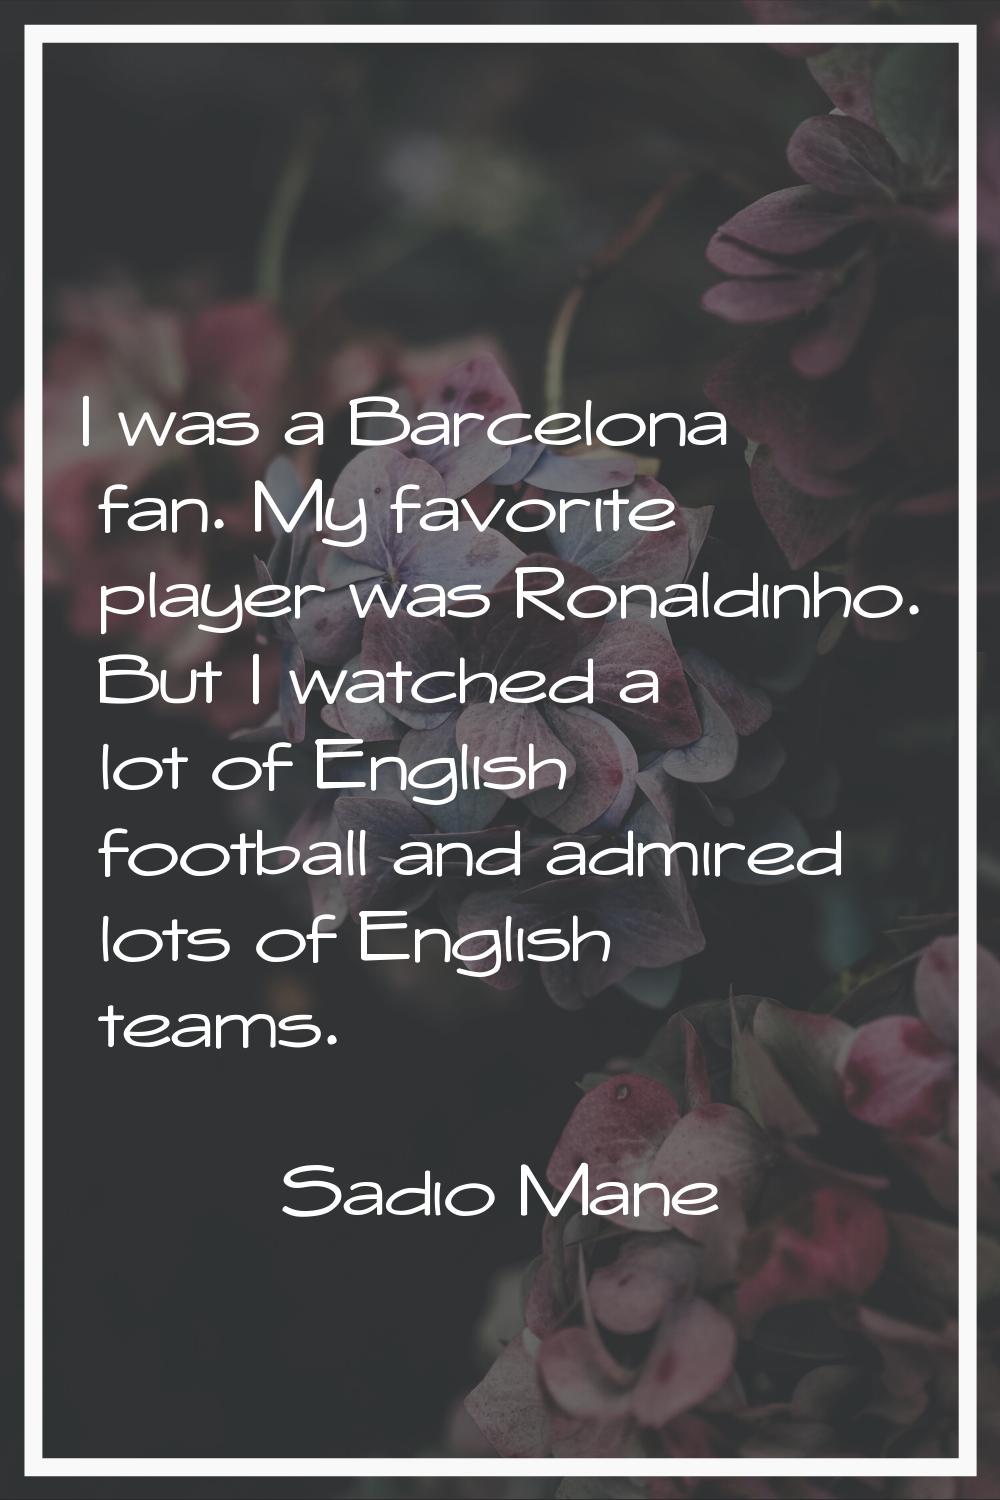 I was a Barcelona fan. My favorite player was Ronaldinho. But I watched a lot of English football a